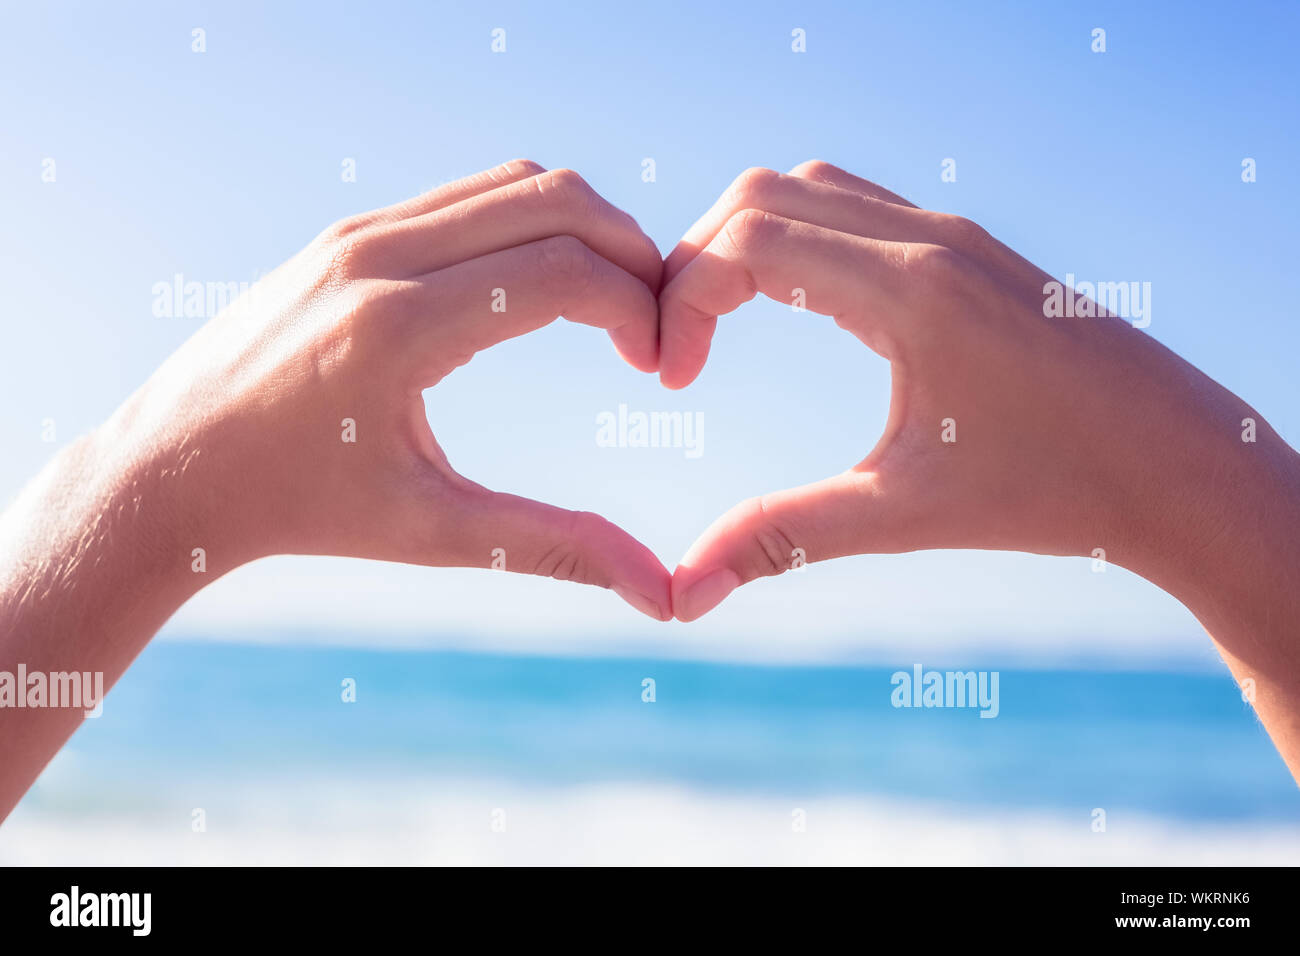 Hands making heart shape on the beach on a sunny day Stock Photo